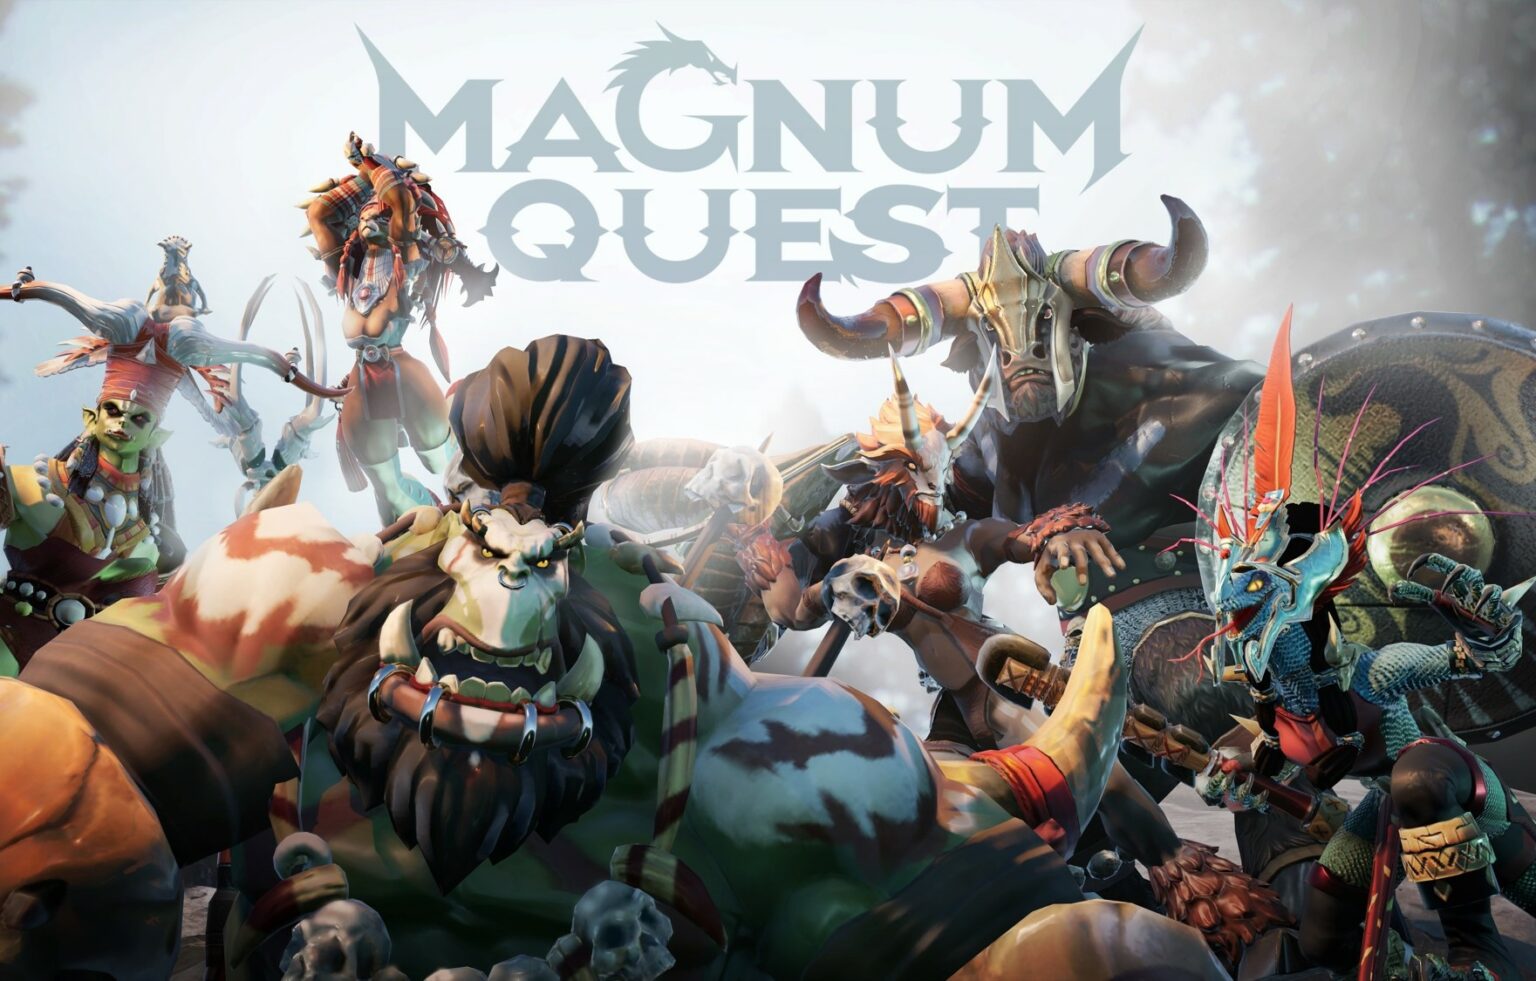 Introducing Magnum Quest; The Story Of The Land Of Armoda